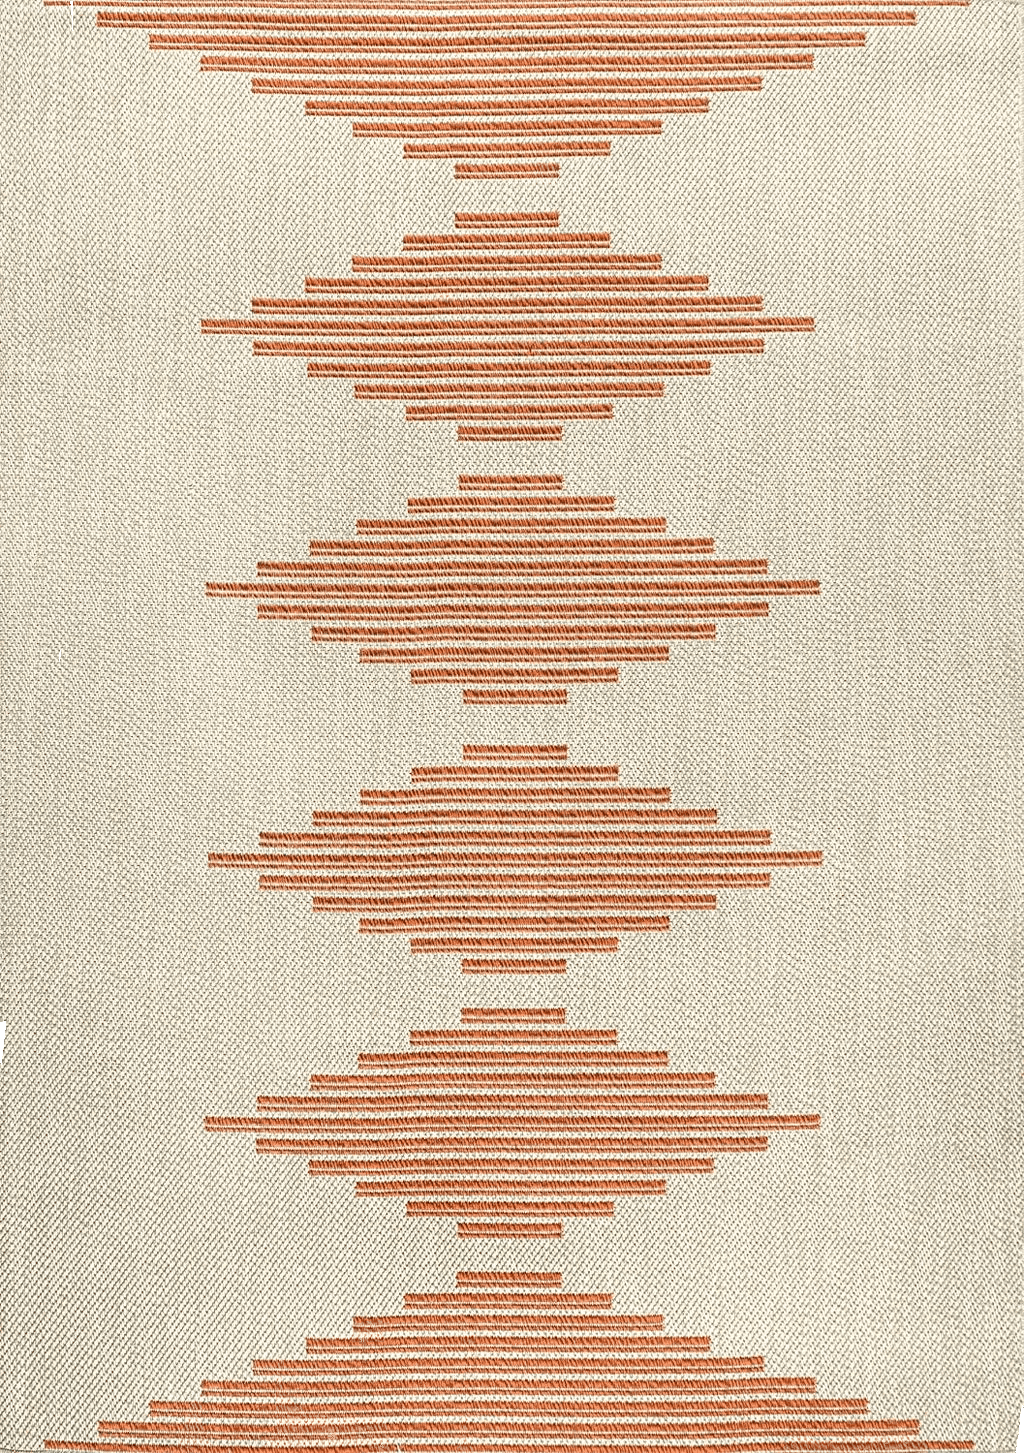 JONATHAN Y SMB204A-4 Vinales Diamond Stripe Indoor Outdoor Farmhouse Transitional Traditional Area Rug,High Traffic,Kitchen,Living Room,Backyard,Non Shedding,4 X 6,Beige/Terracotta